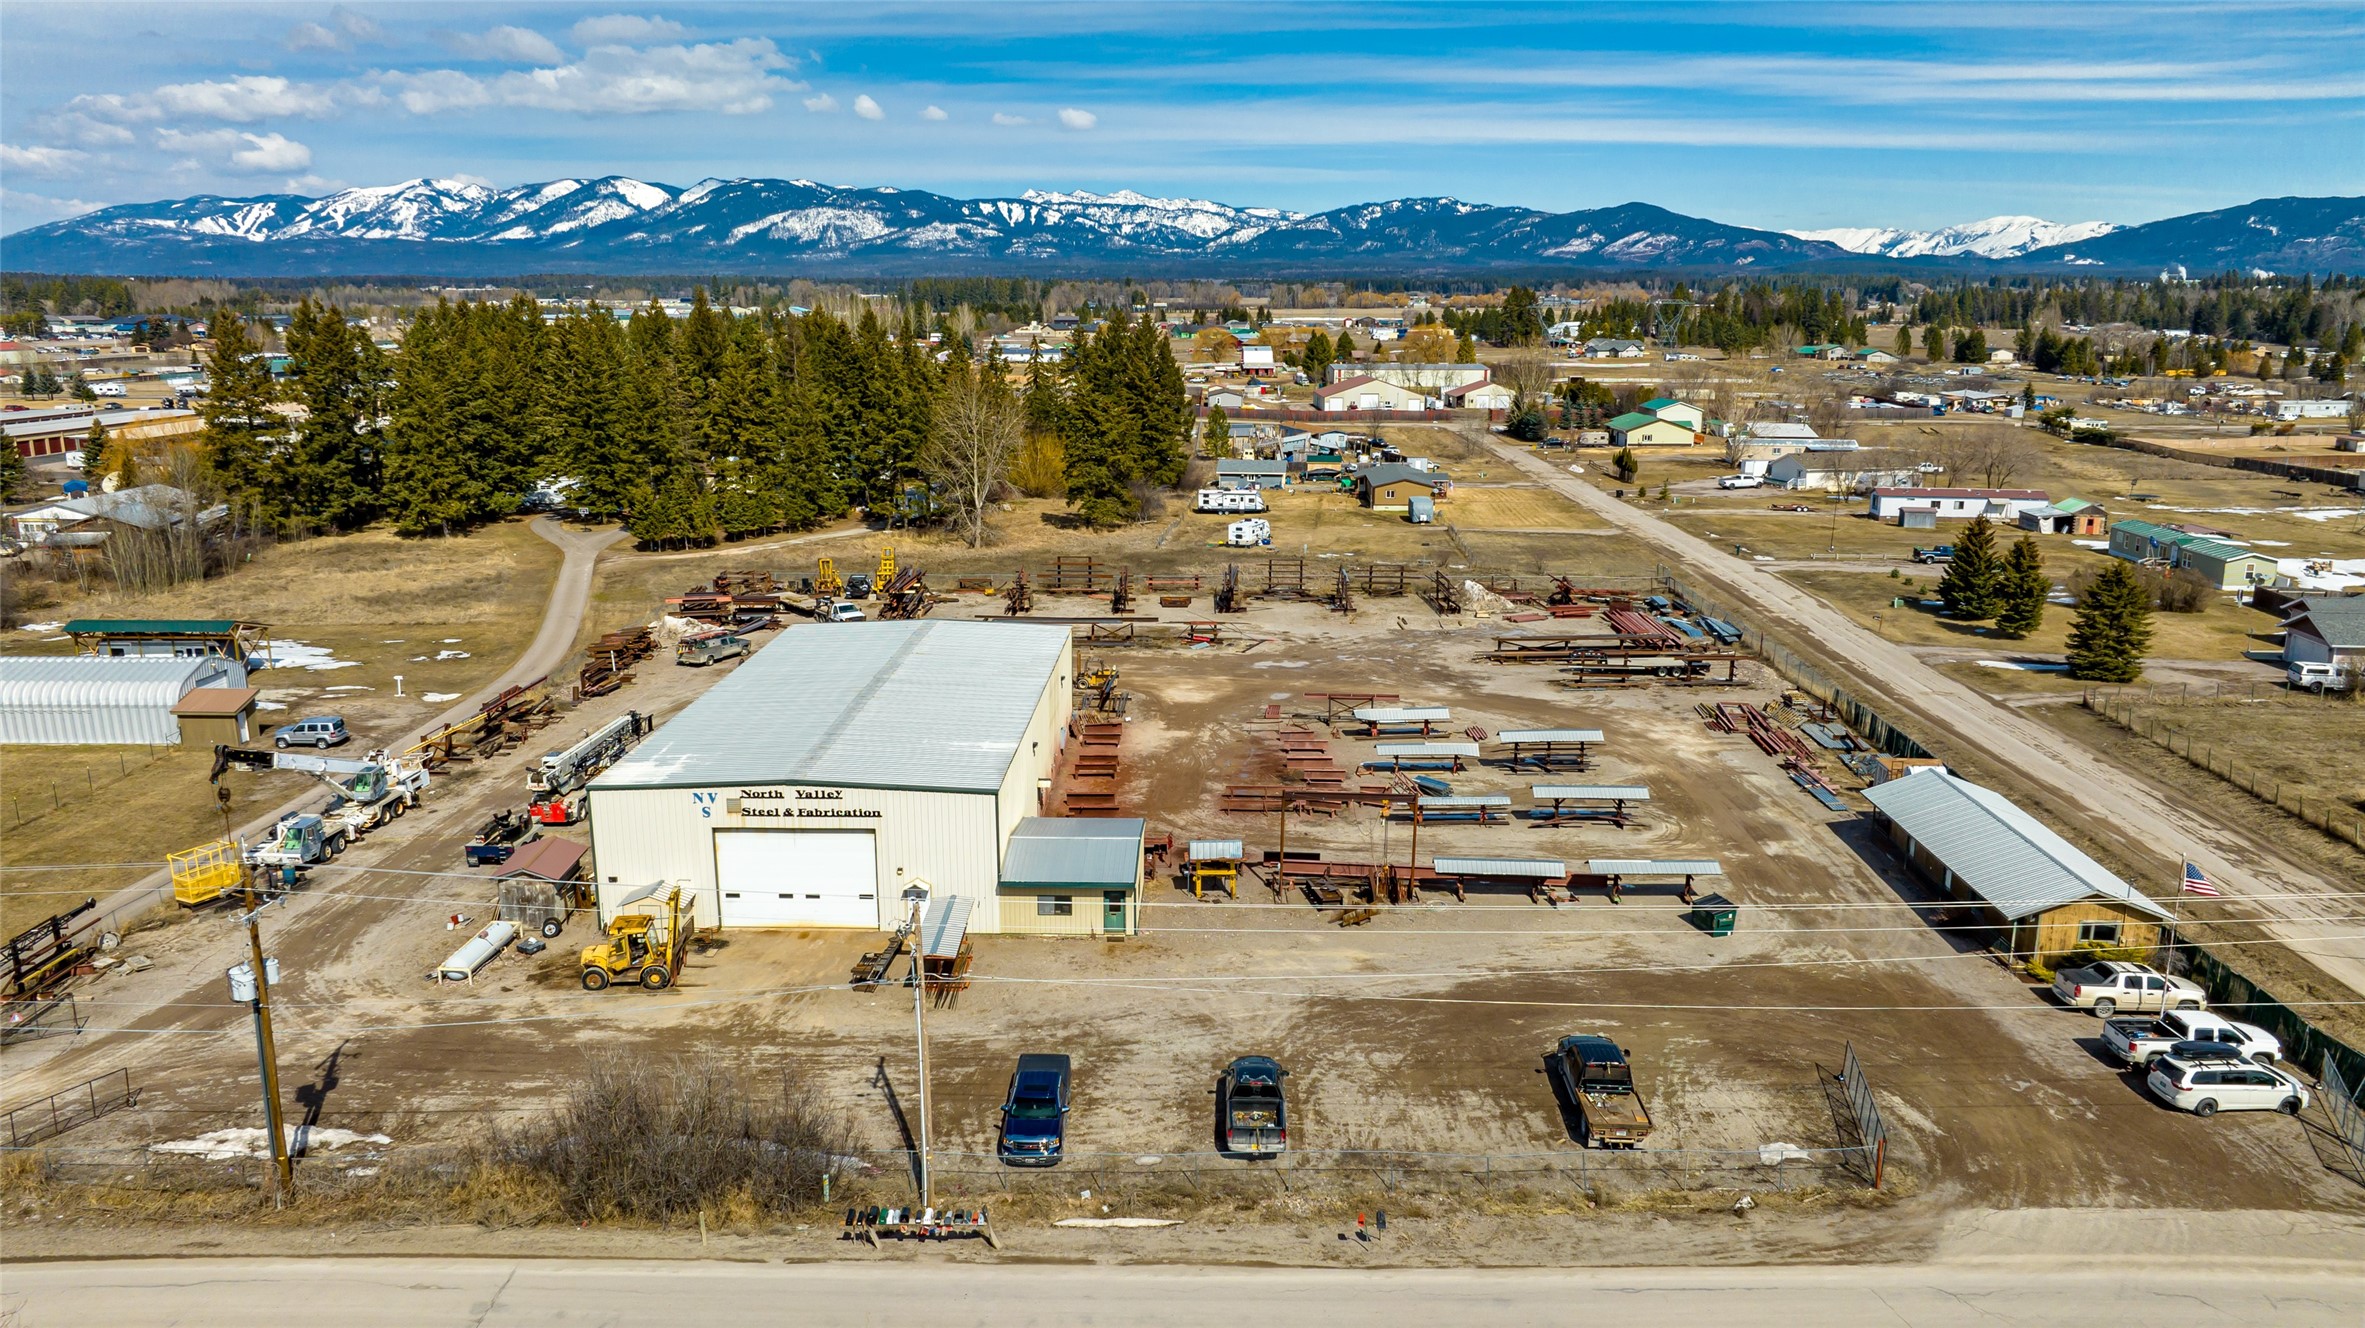 If you’re seeking a highly successful Flathead Valley business with a sterling reputation and strong growth potential, look no further than North Valley Steel & Fabrication. This institution in the Flathead Valley construction industry has been in business for 40 years, operating from an unzoned 2.7-acre site centrally located between Columbia Falls, Whitefish and Kalispell. Included in this offering is the real estate and equipment needed — forklifts, cranes, trucks, trailers, lifts, metalworking equipment, etc… — to continue operation for years to come. See “Personal Property Included” in documents for a complete list. Fabrication takes place in a 60’ X 120’ heated and insulated shop with 21’ ceilings and four 16’-tall overhead doors. A separate 960sf office serves the administrative staff. Surplus acreage offers plenty of space for outside storage and/or additional development.  Call Dave Stone at 406-250-7249, or your real estate professional.